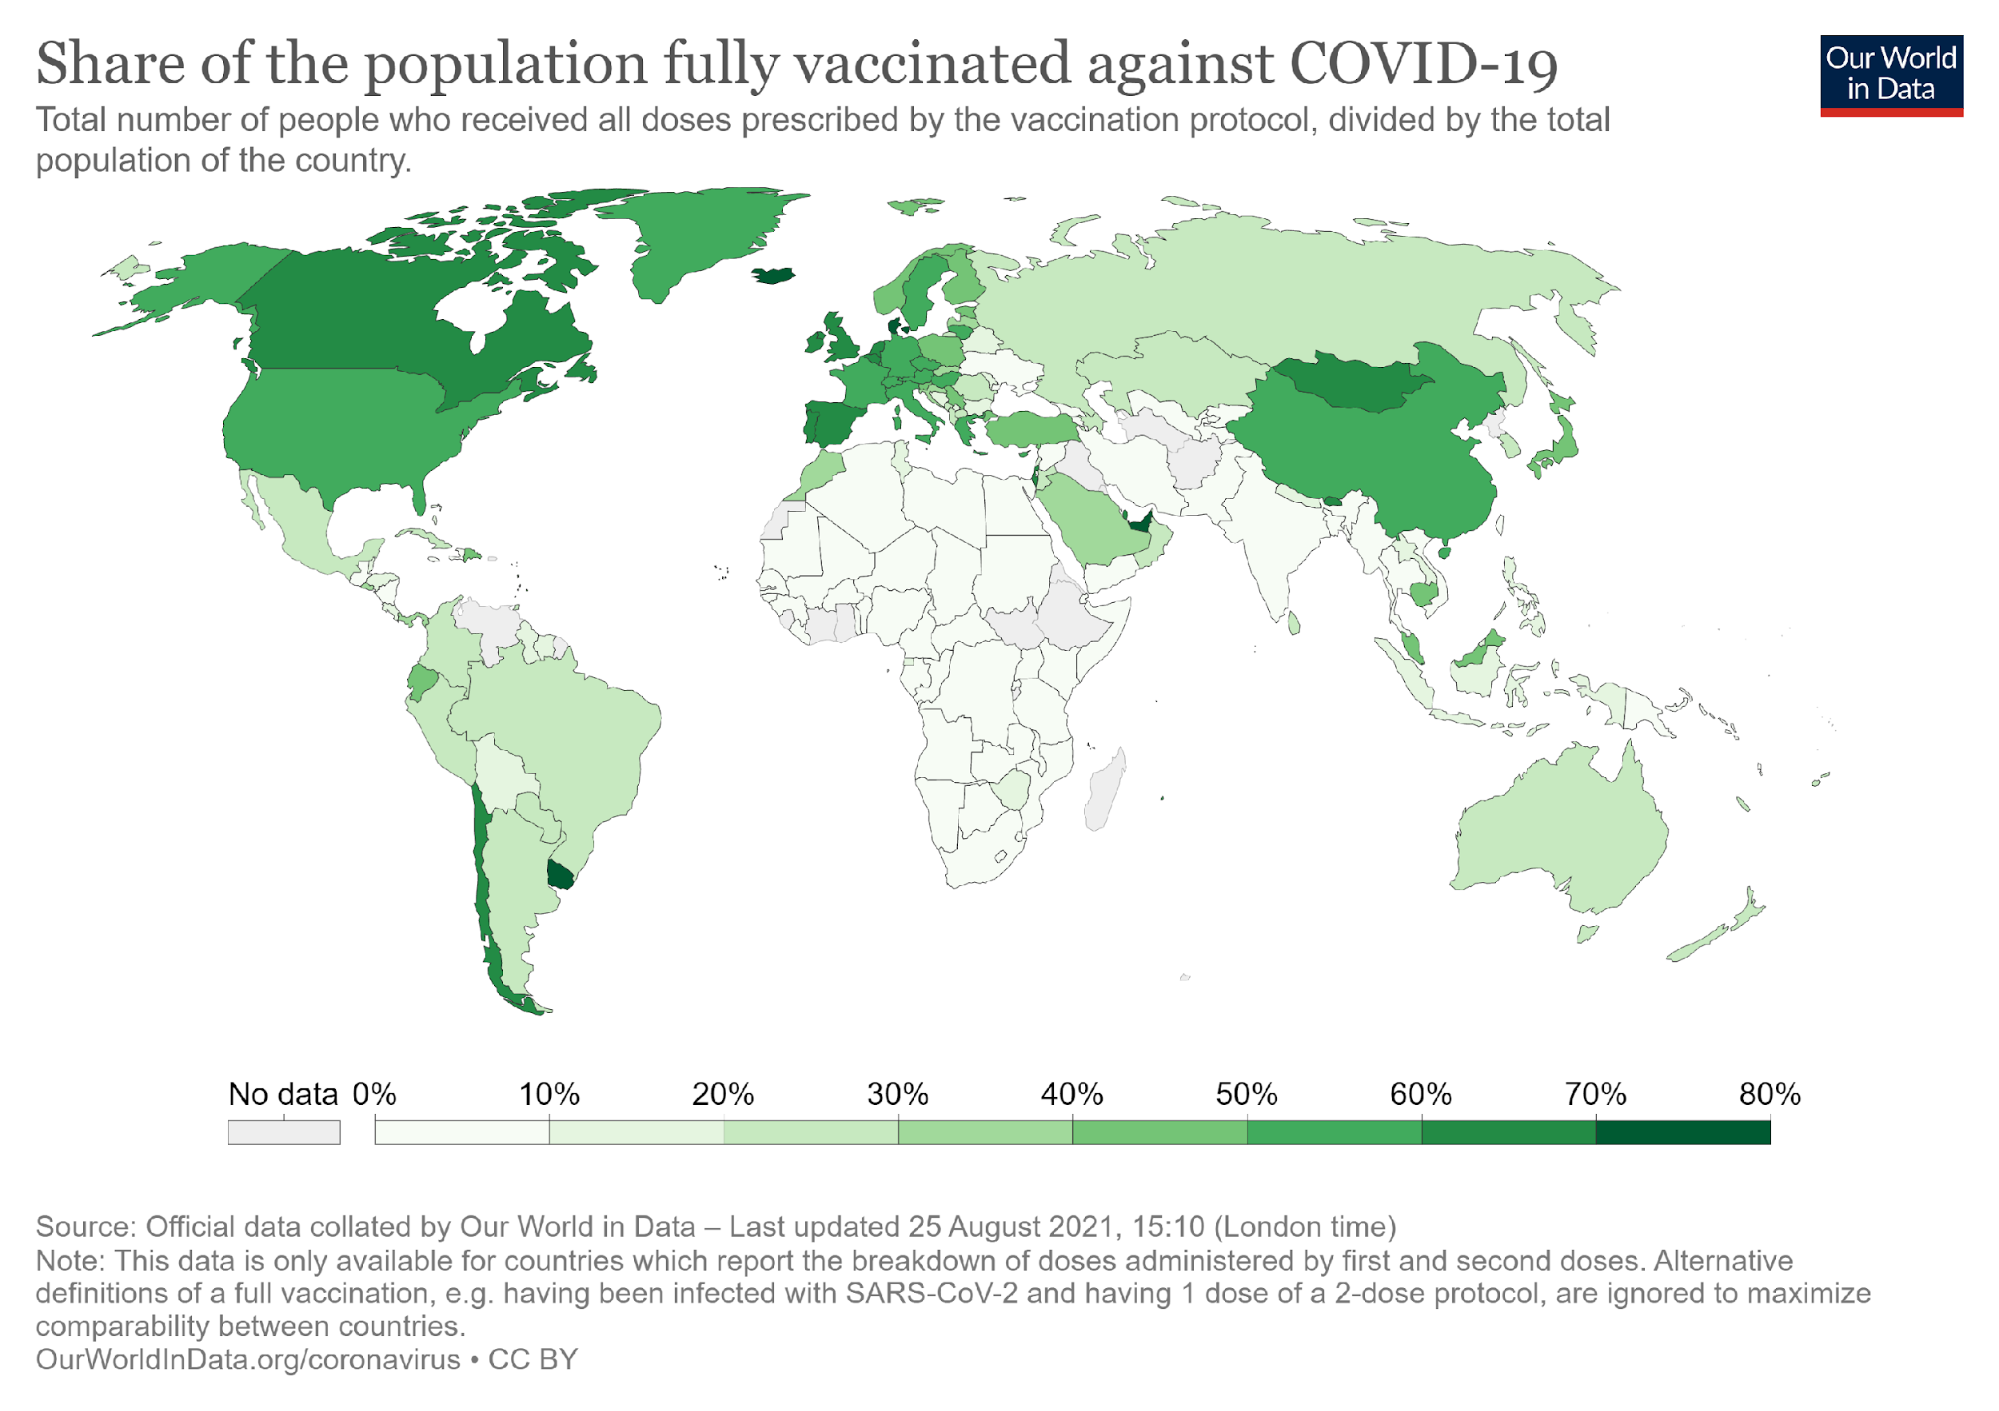 Map of the world showing the share of the population fully vaccinated against COVID-19 per country, showing that Europe, North America, and East Asia have the most fully vaccinated populations, and Africa the least